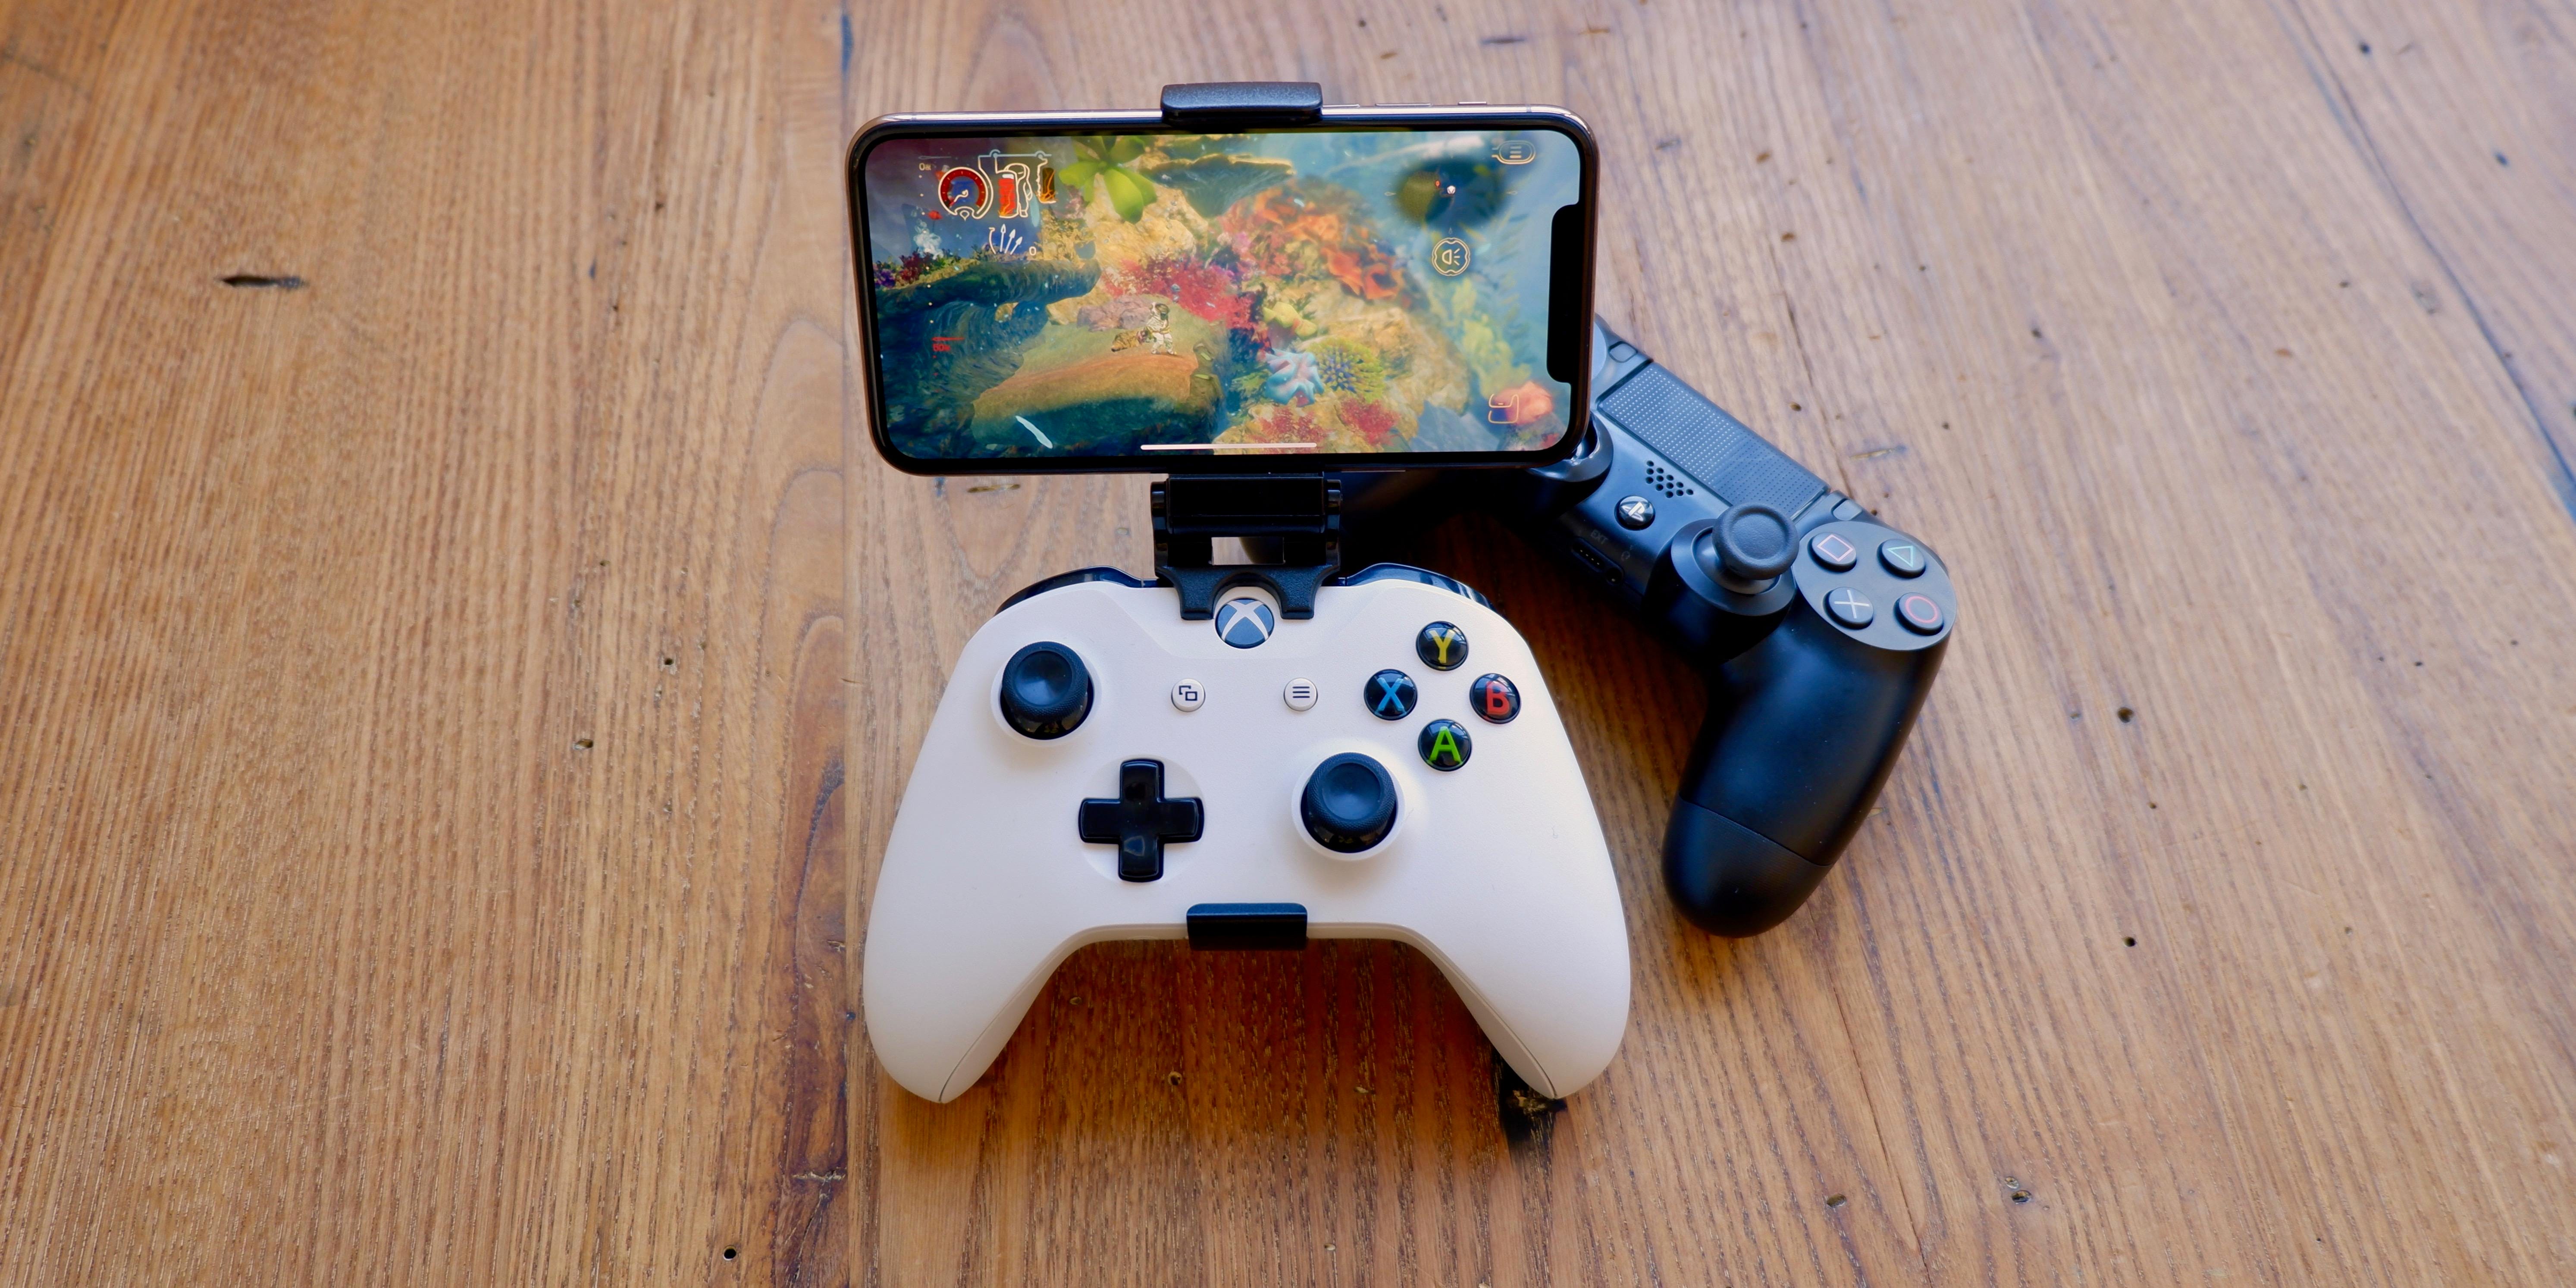 The easy way to connect your PS4 or Xbox controller your iPhone - CNET